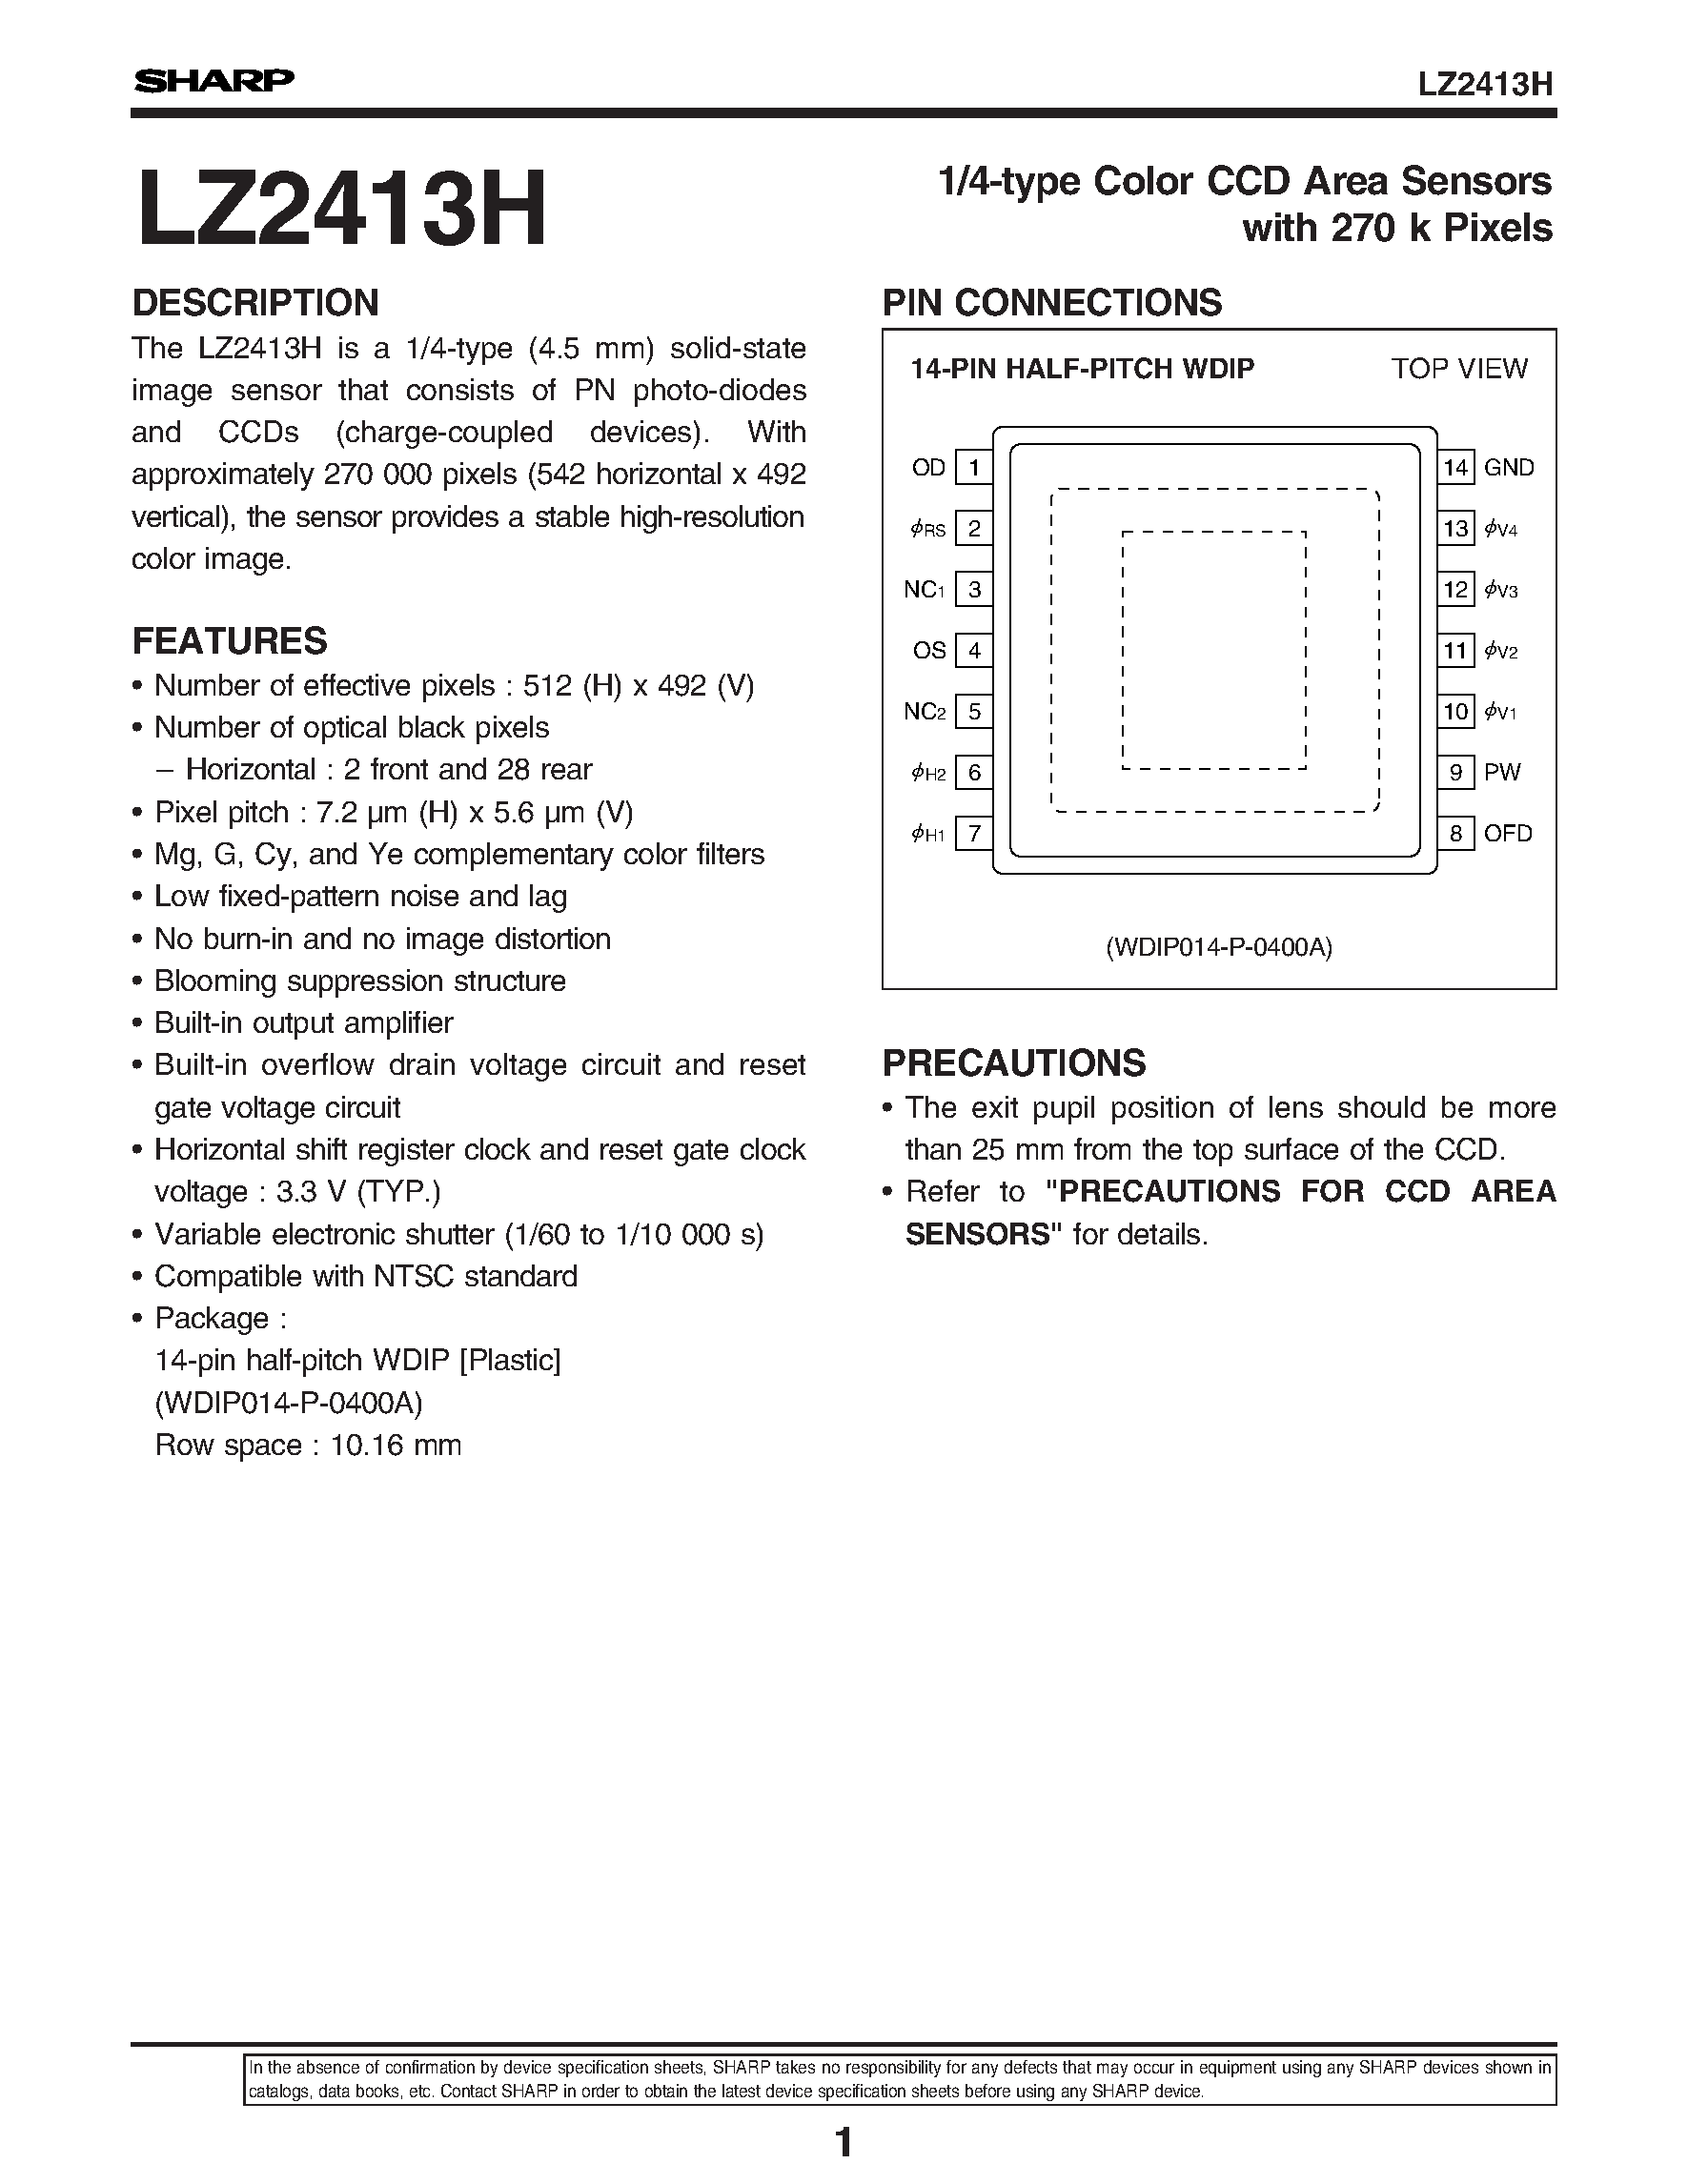 Datasheet LZ2413 - 1/4-type Color CCD Area Sensors with 270 k Pixels page 1